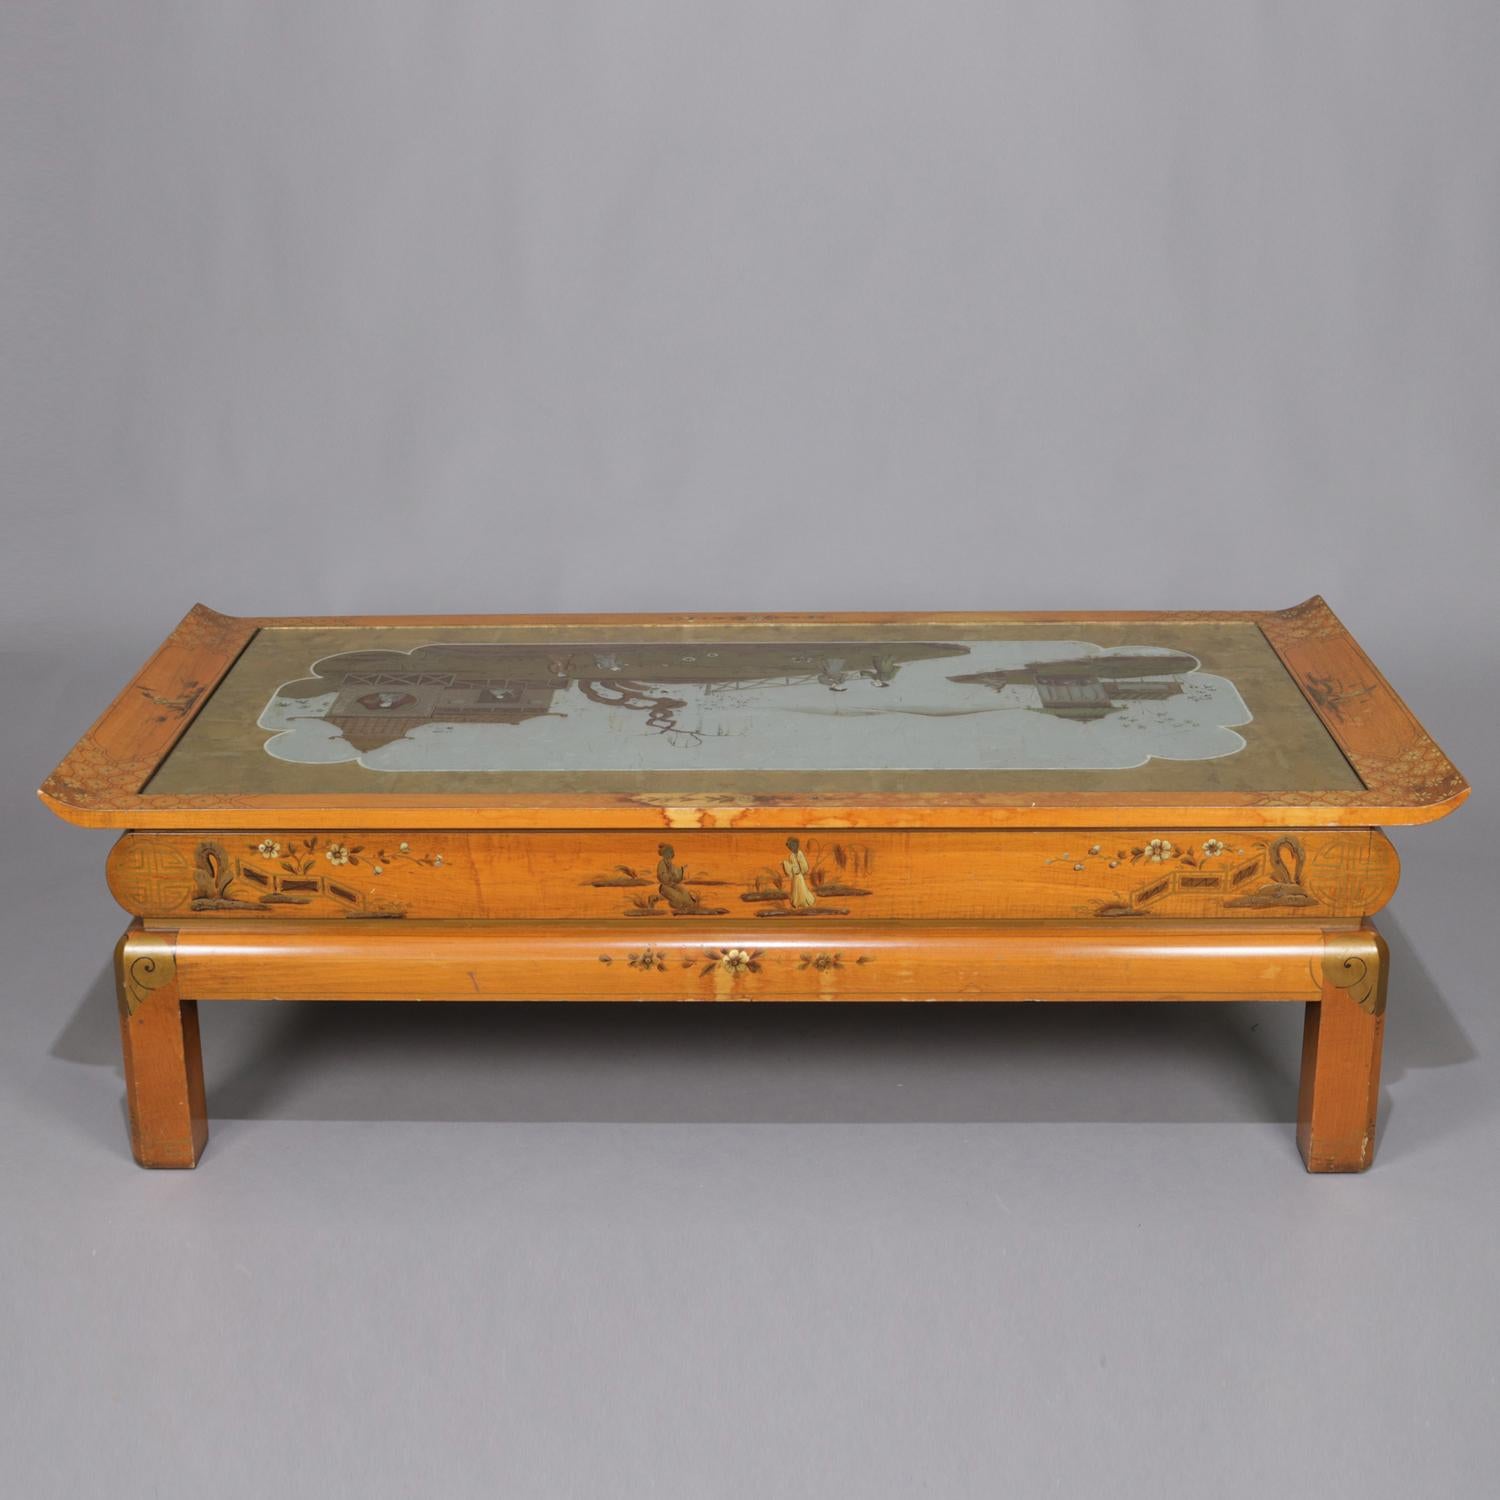 Oversized Hand-Painted and Gilt Pictorial Chinoiserie Coffee Table, circa 1940 For Sale 1